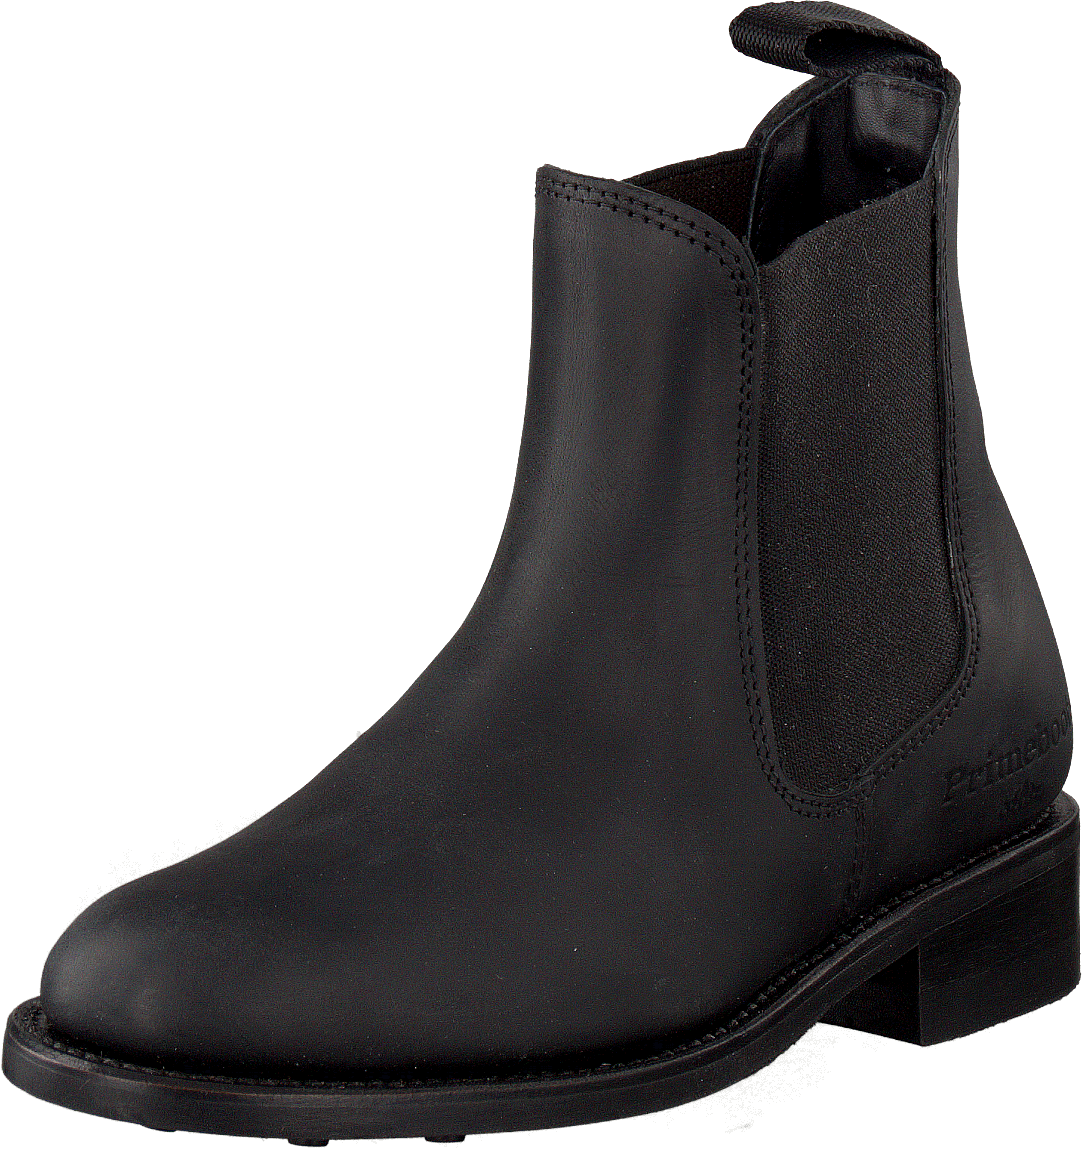 Ascot Maidenshead Low-332 Old crazy black